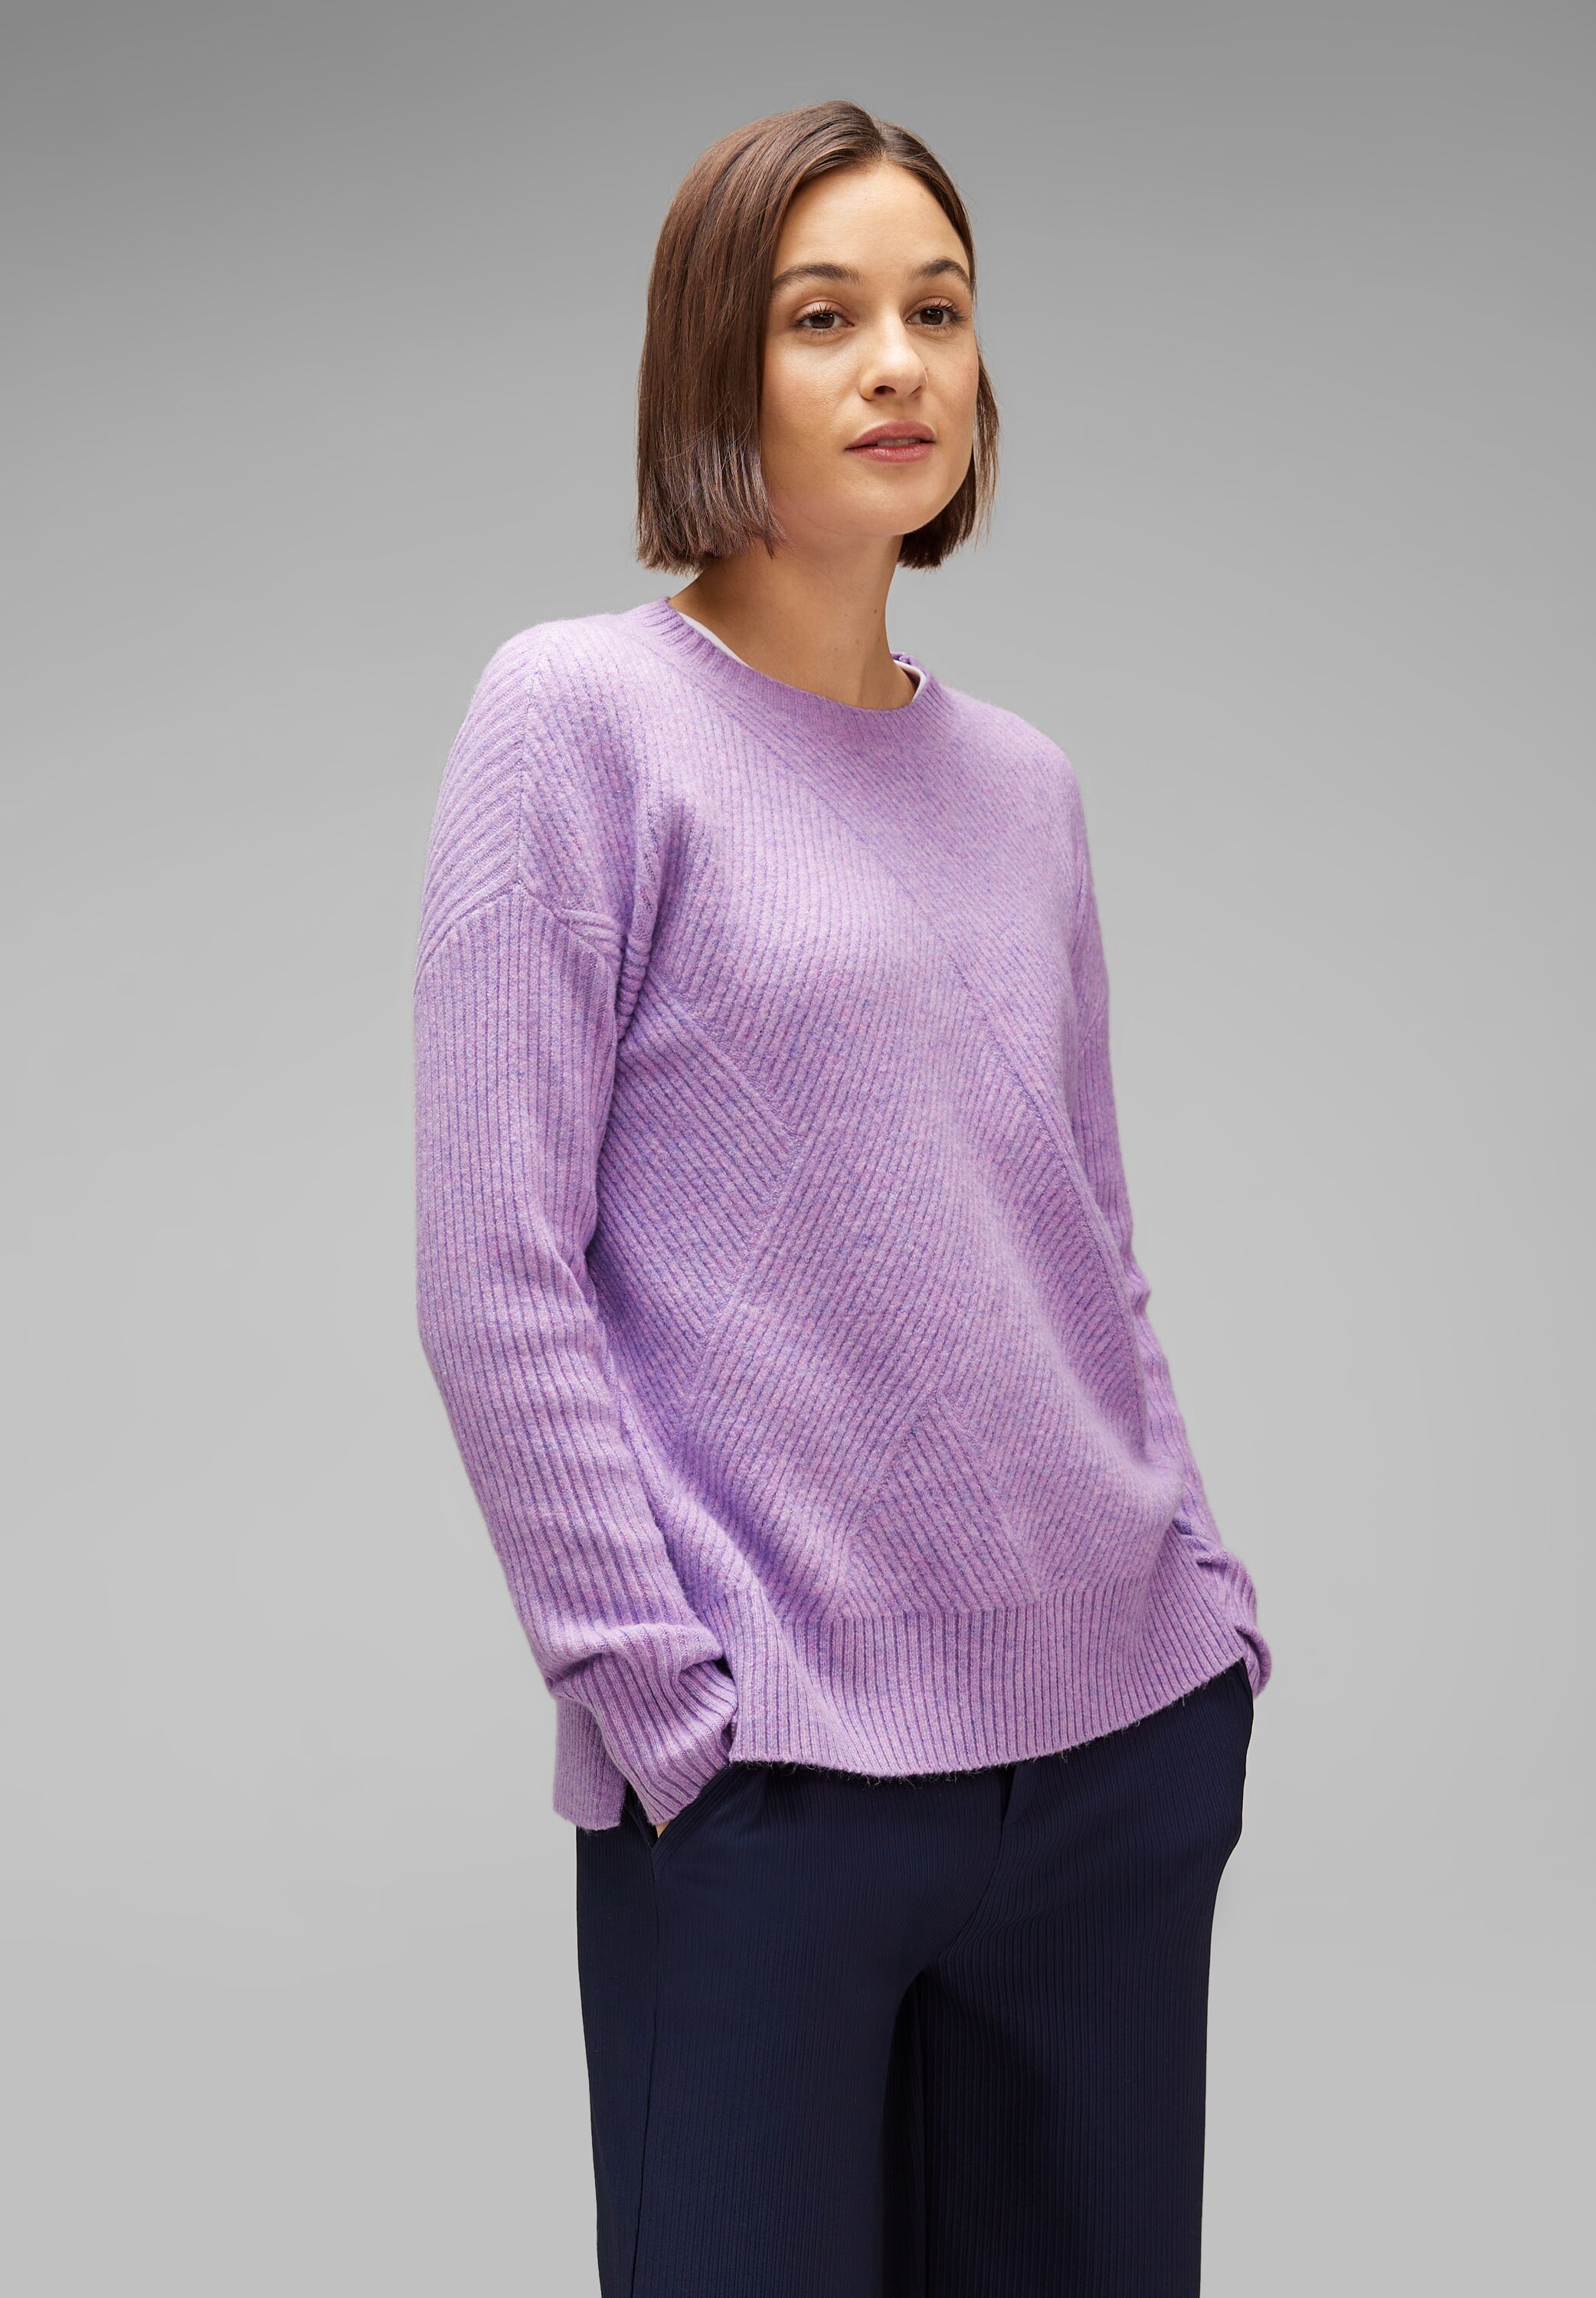 Street One Pullover in Soft Pure Lilac Melange im SALE reduziert  A302483-15290 - CONCEPT Mode